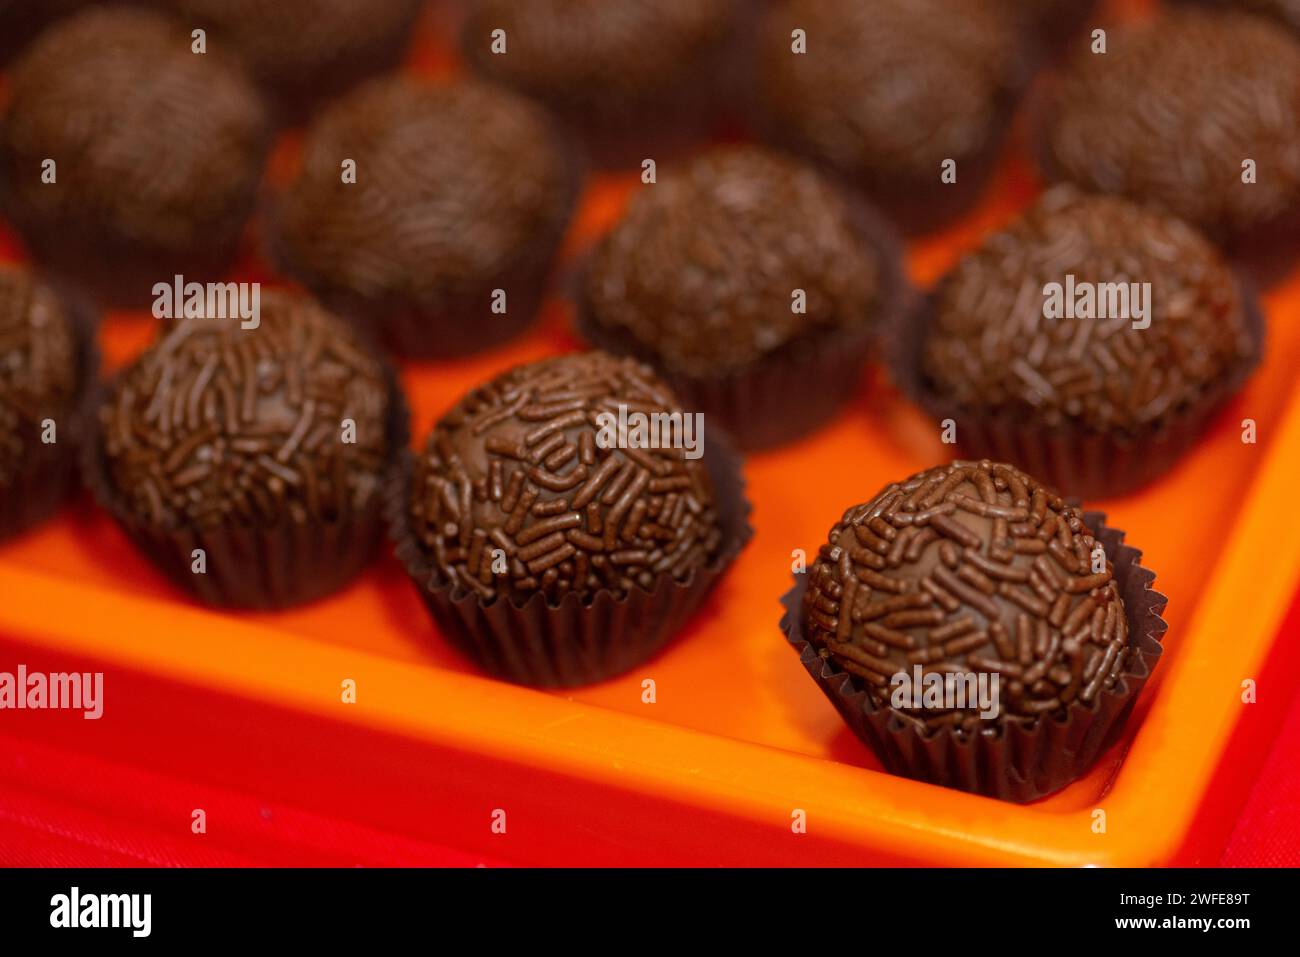 Assorted chocolates showcased on a vibrant red table Stock Photo